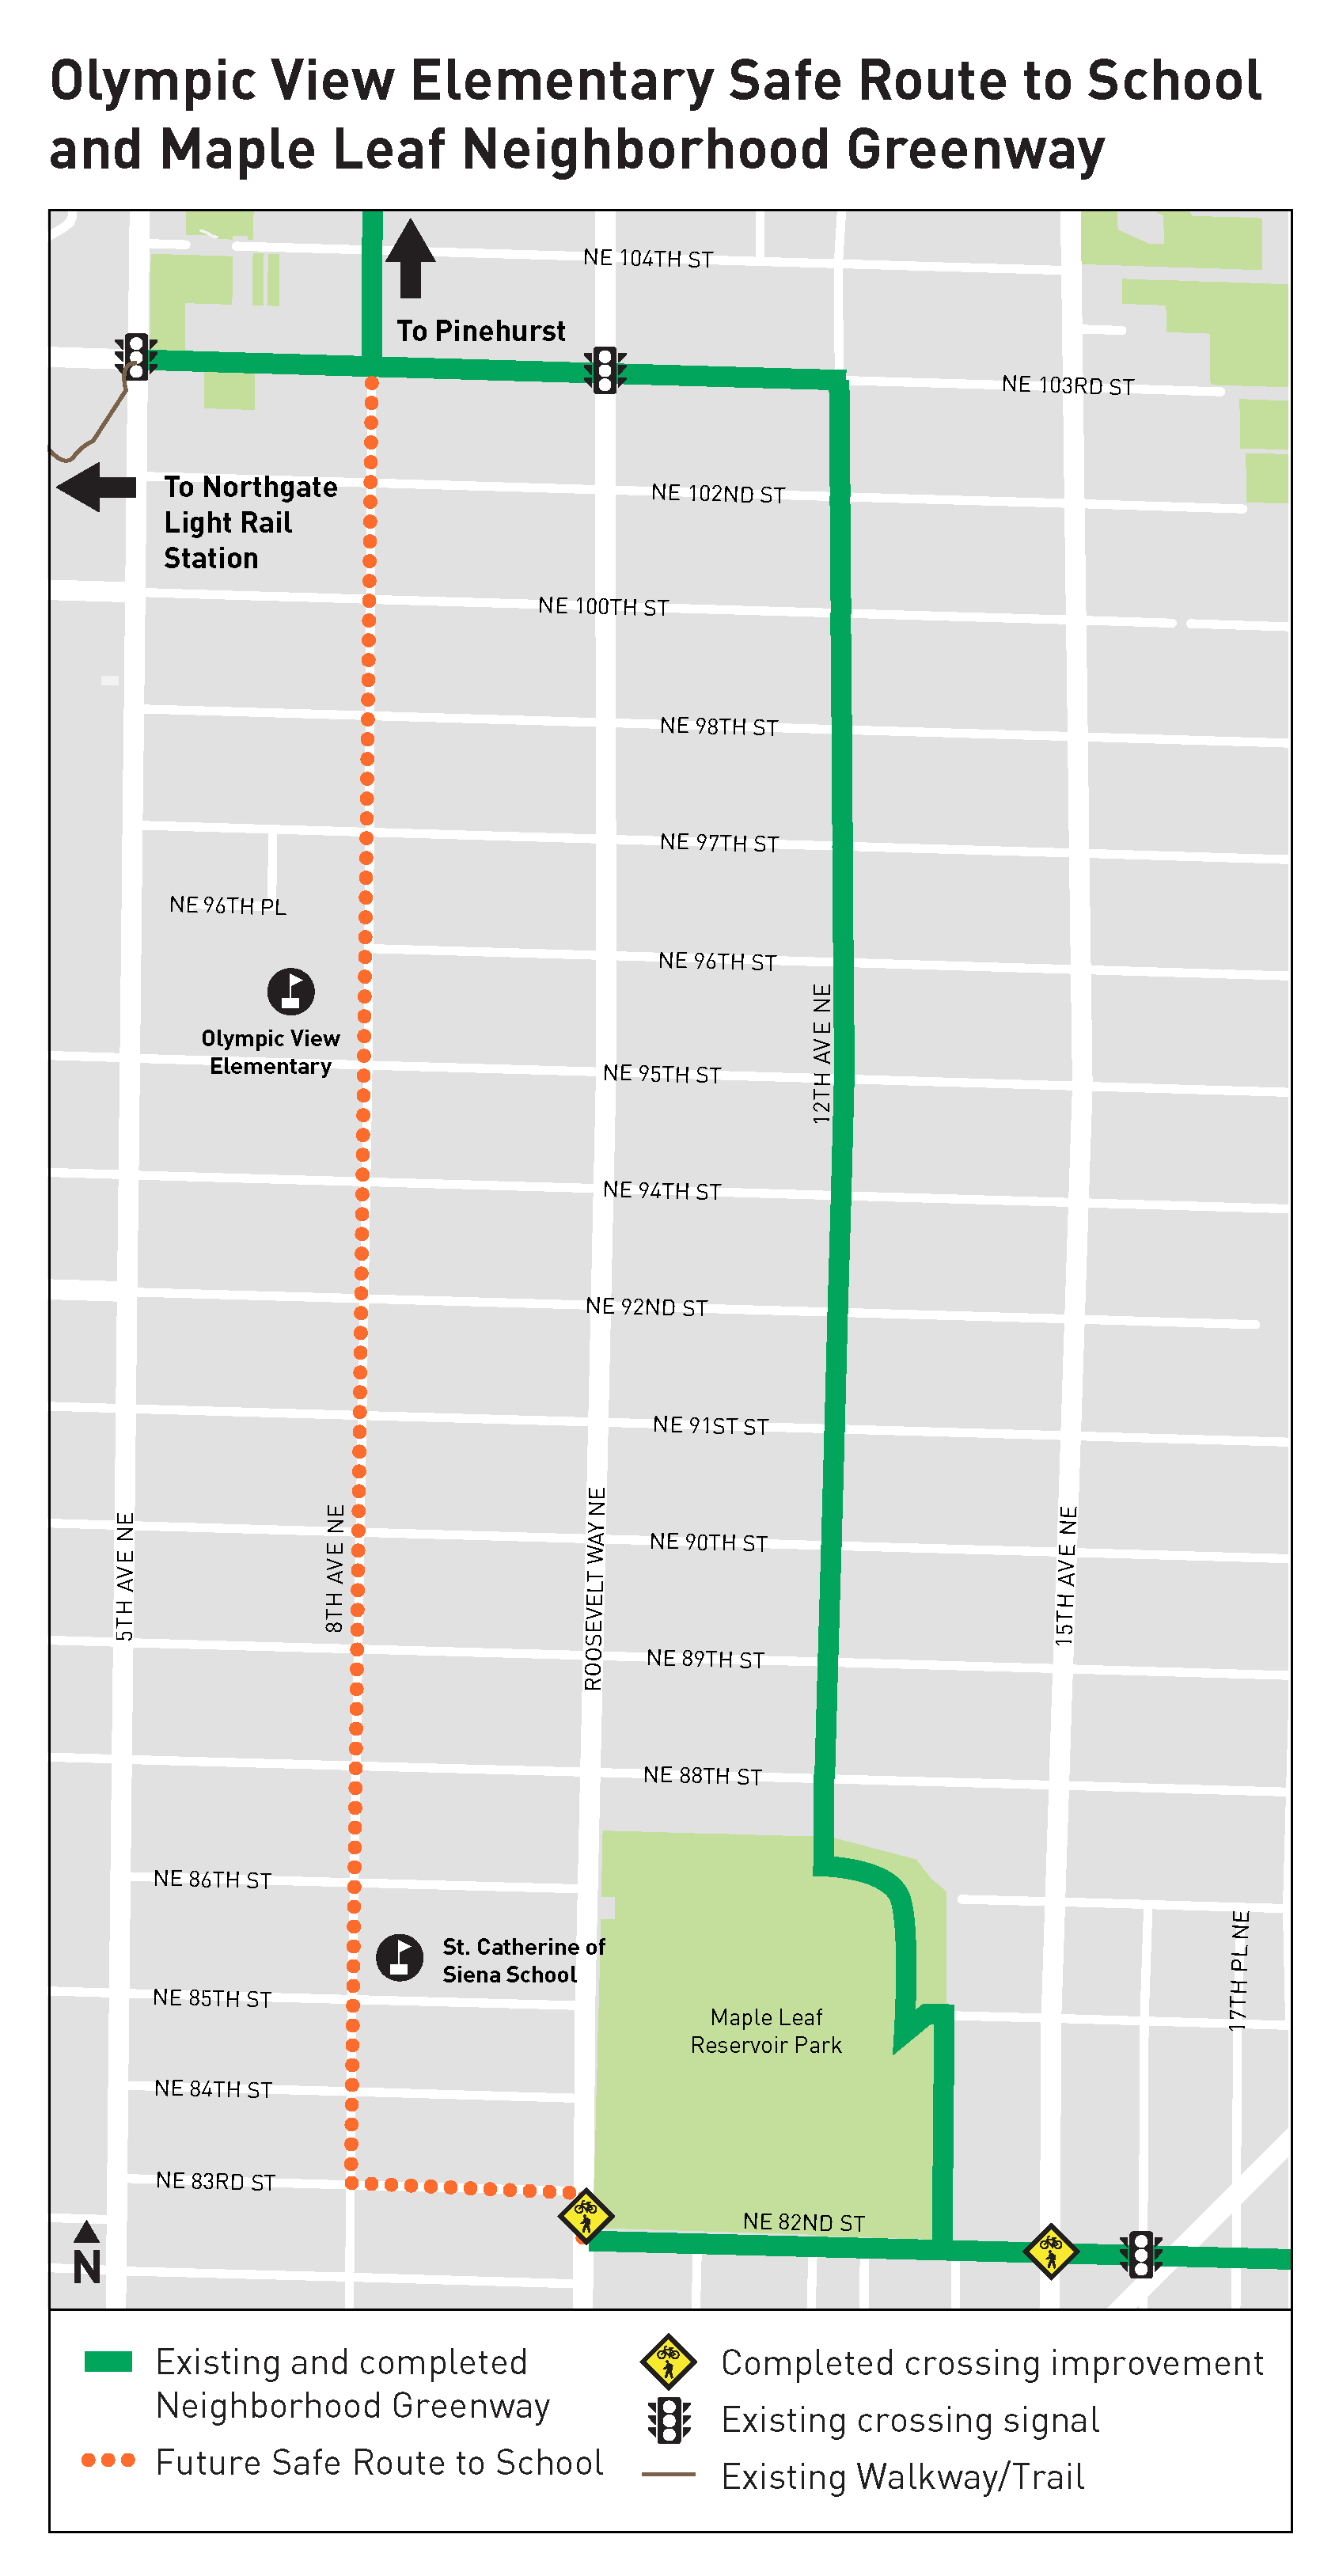 Map Graphic showing route for new Olympic View Elementary Safe Route to School and Maple Leaf Neighborhood Greenway